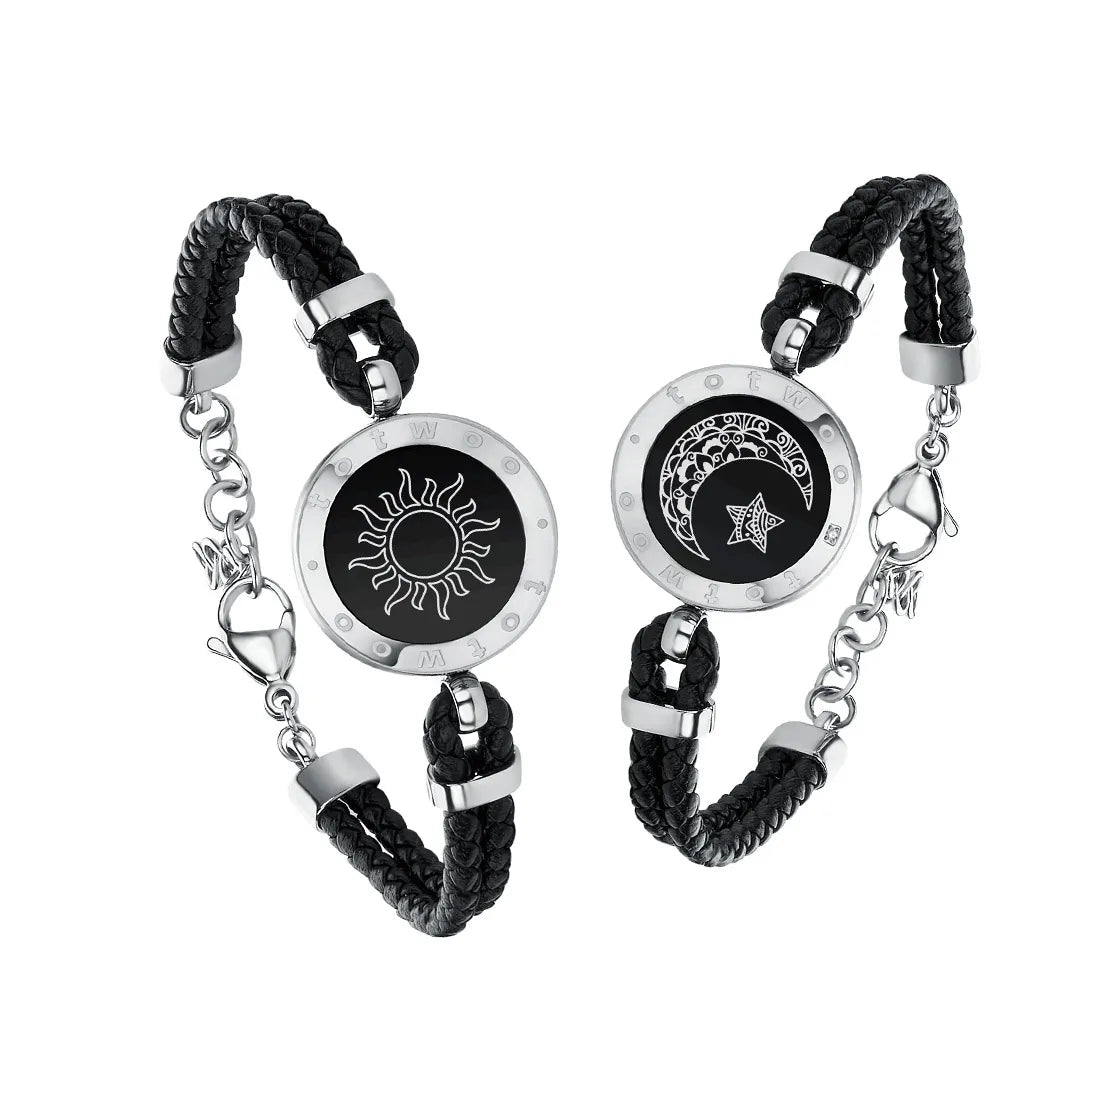 Cute Astronaut Magnetic Couple Cute Couple Bracelets Adjustable Friendship  Rope Set For Distance Mutual Attraction C2544 From Aydqo, $29.97 |  DHgate.Com